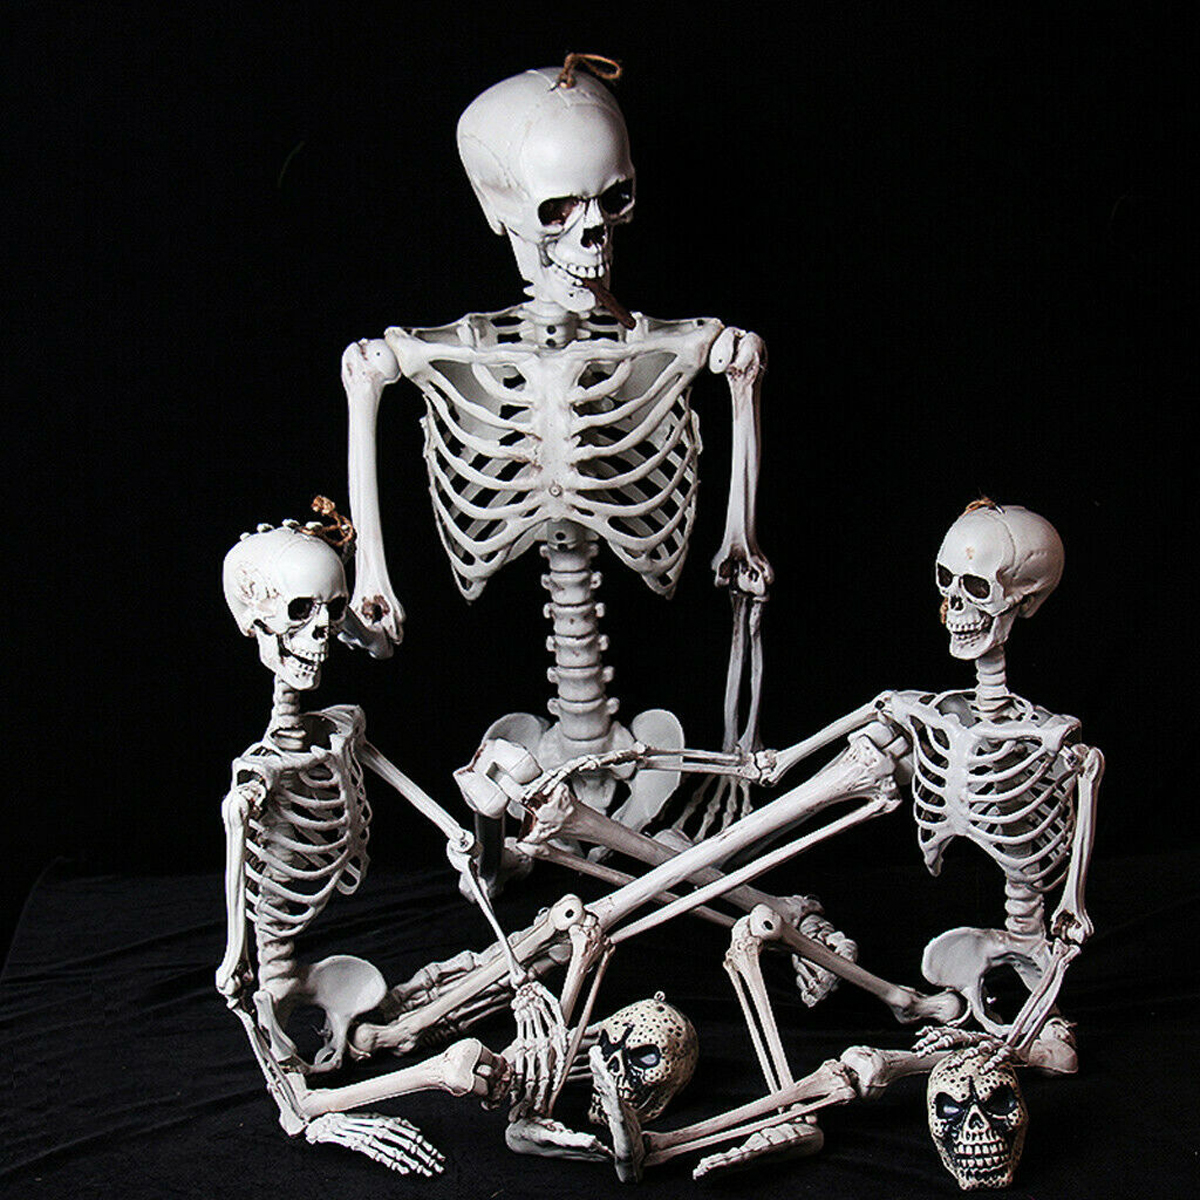 90cm-Human-Skeleton-Scary-Bones-Poseable-Hanging-Halloween-Prop-Party-Decorations-1573645-6